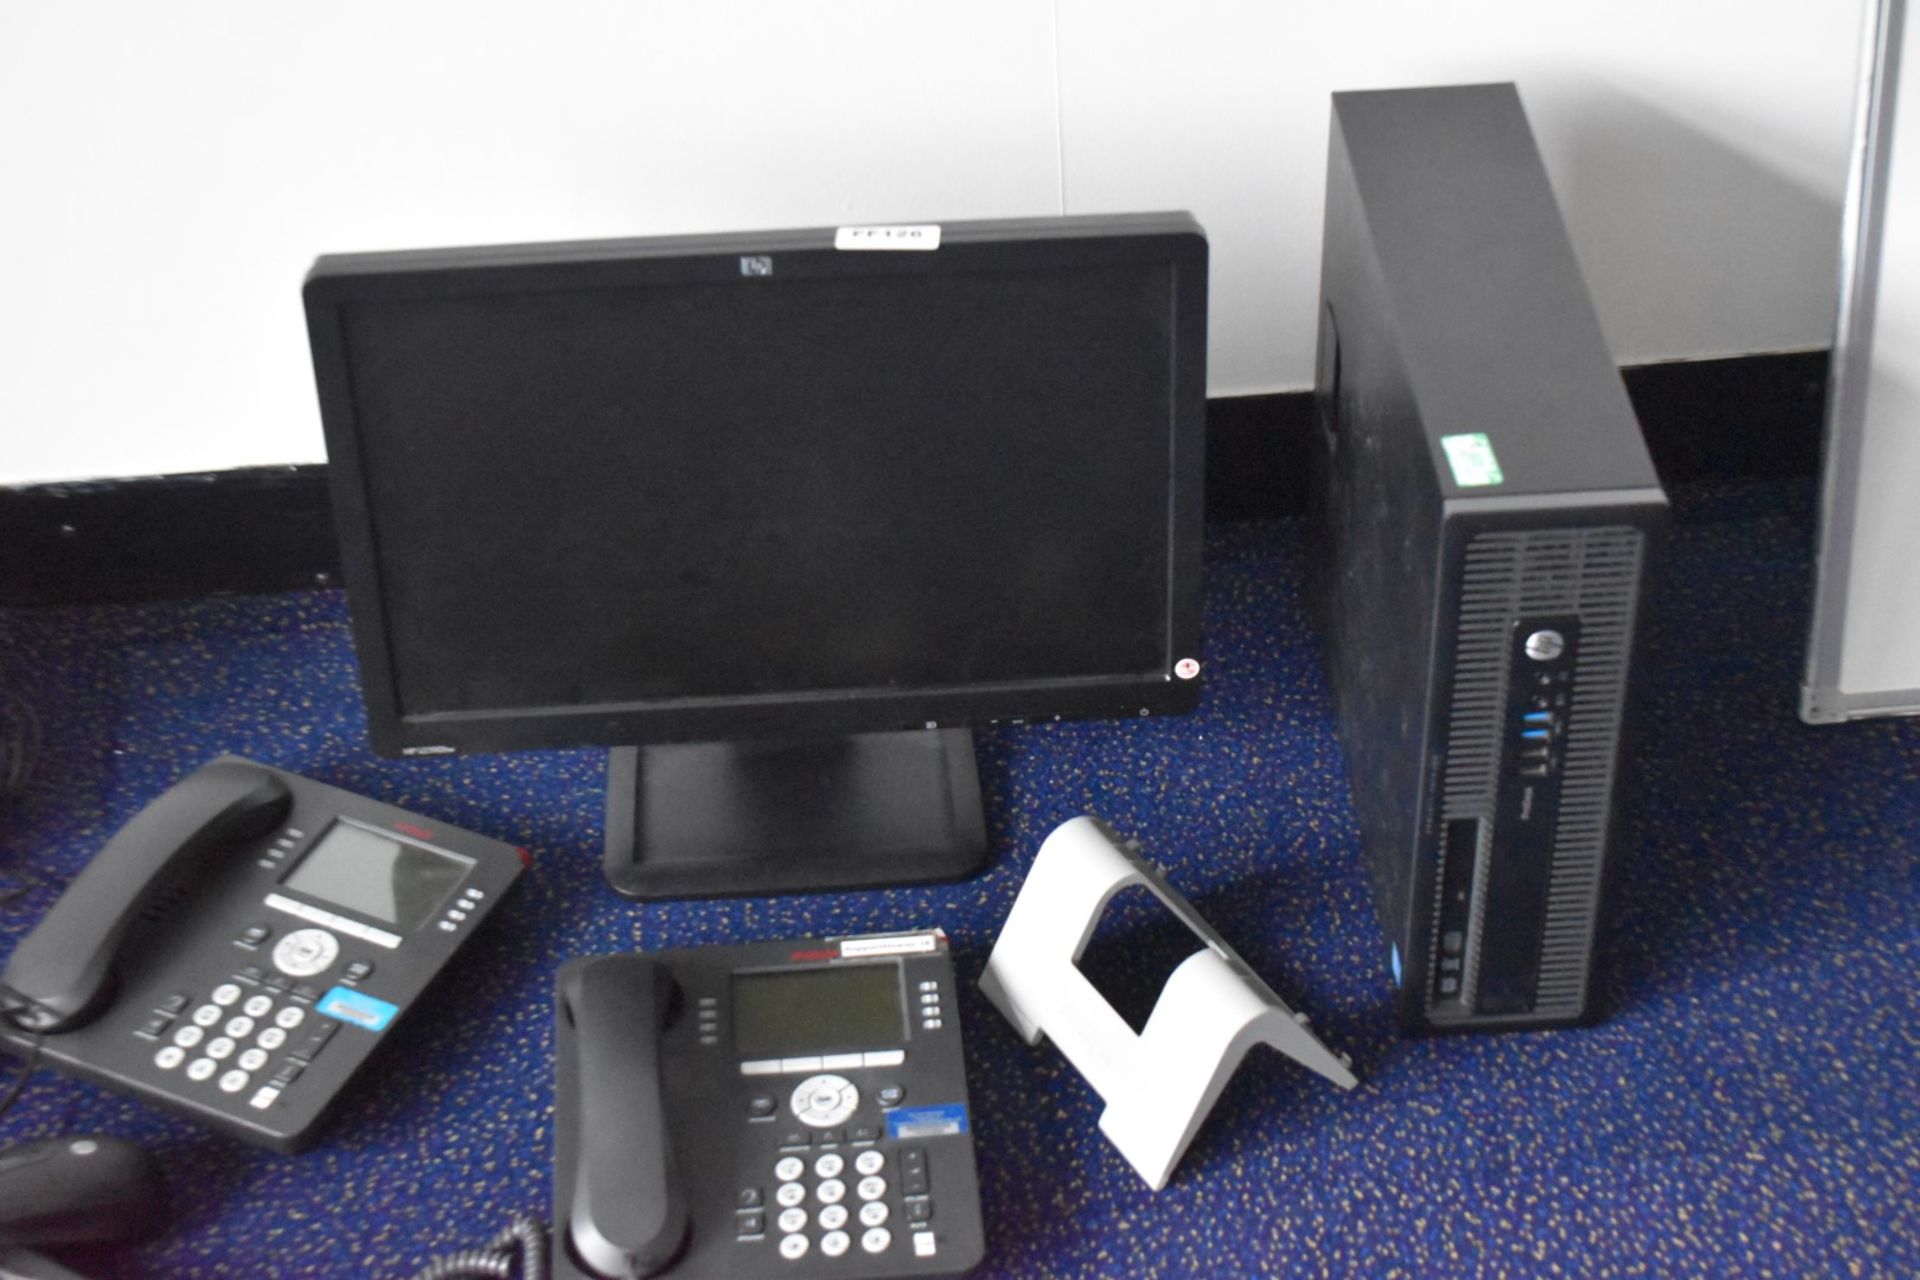 1 x Assorted Collection of Computer Equipment Including HP Core i3 Desktop Computer, Avaya 9608